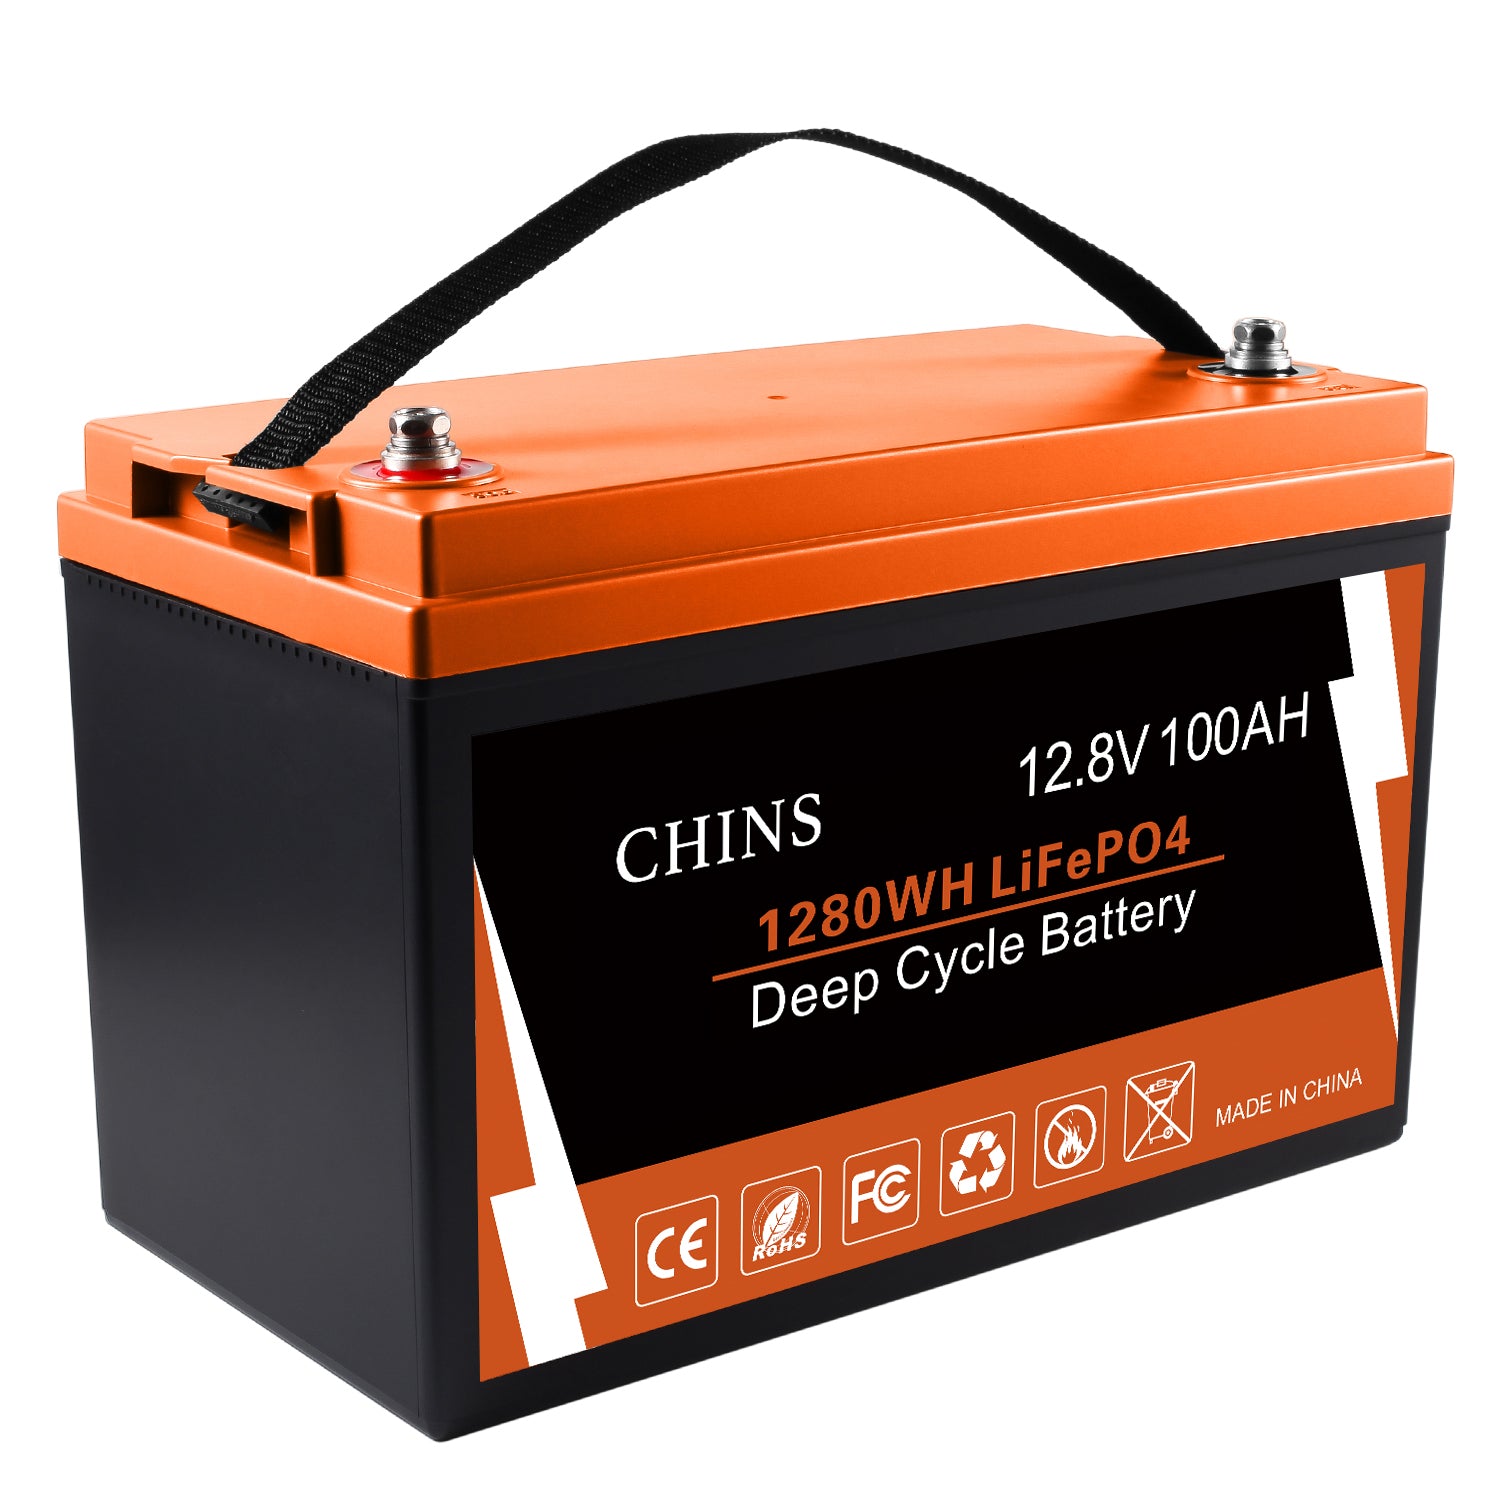 CHINS Smart 12.8V 100AH Lithium Battery, Support Low Temperature